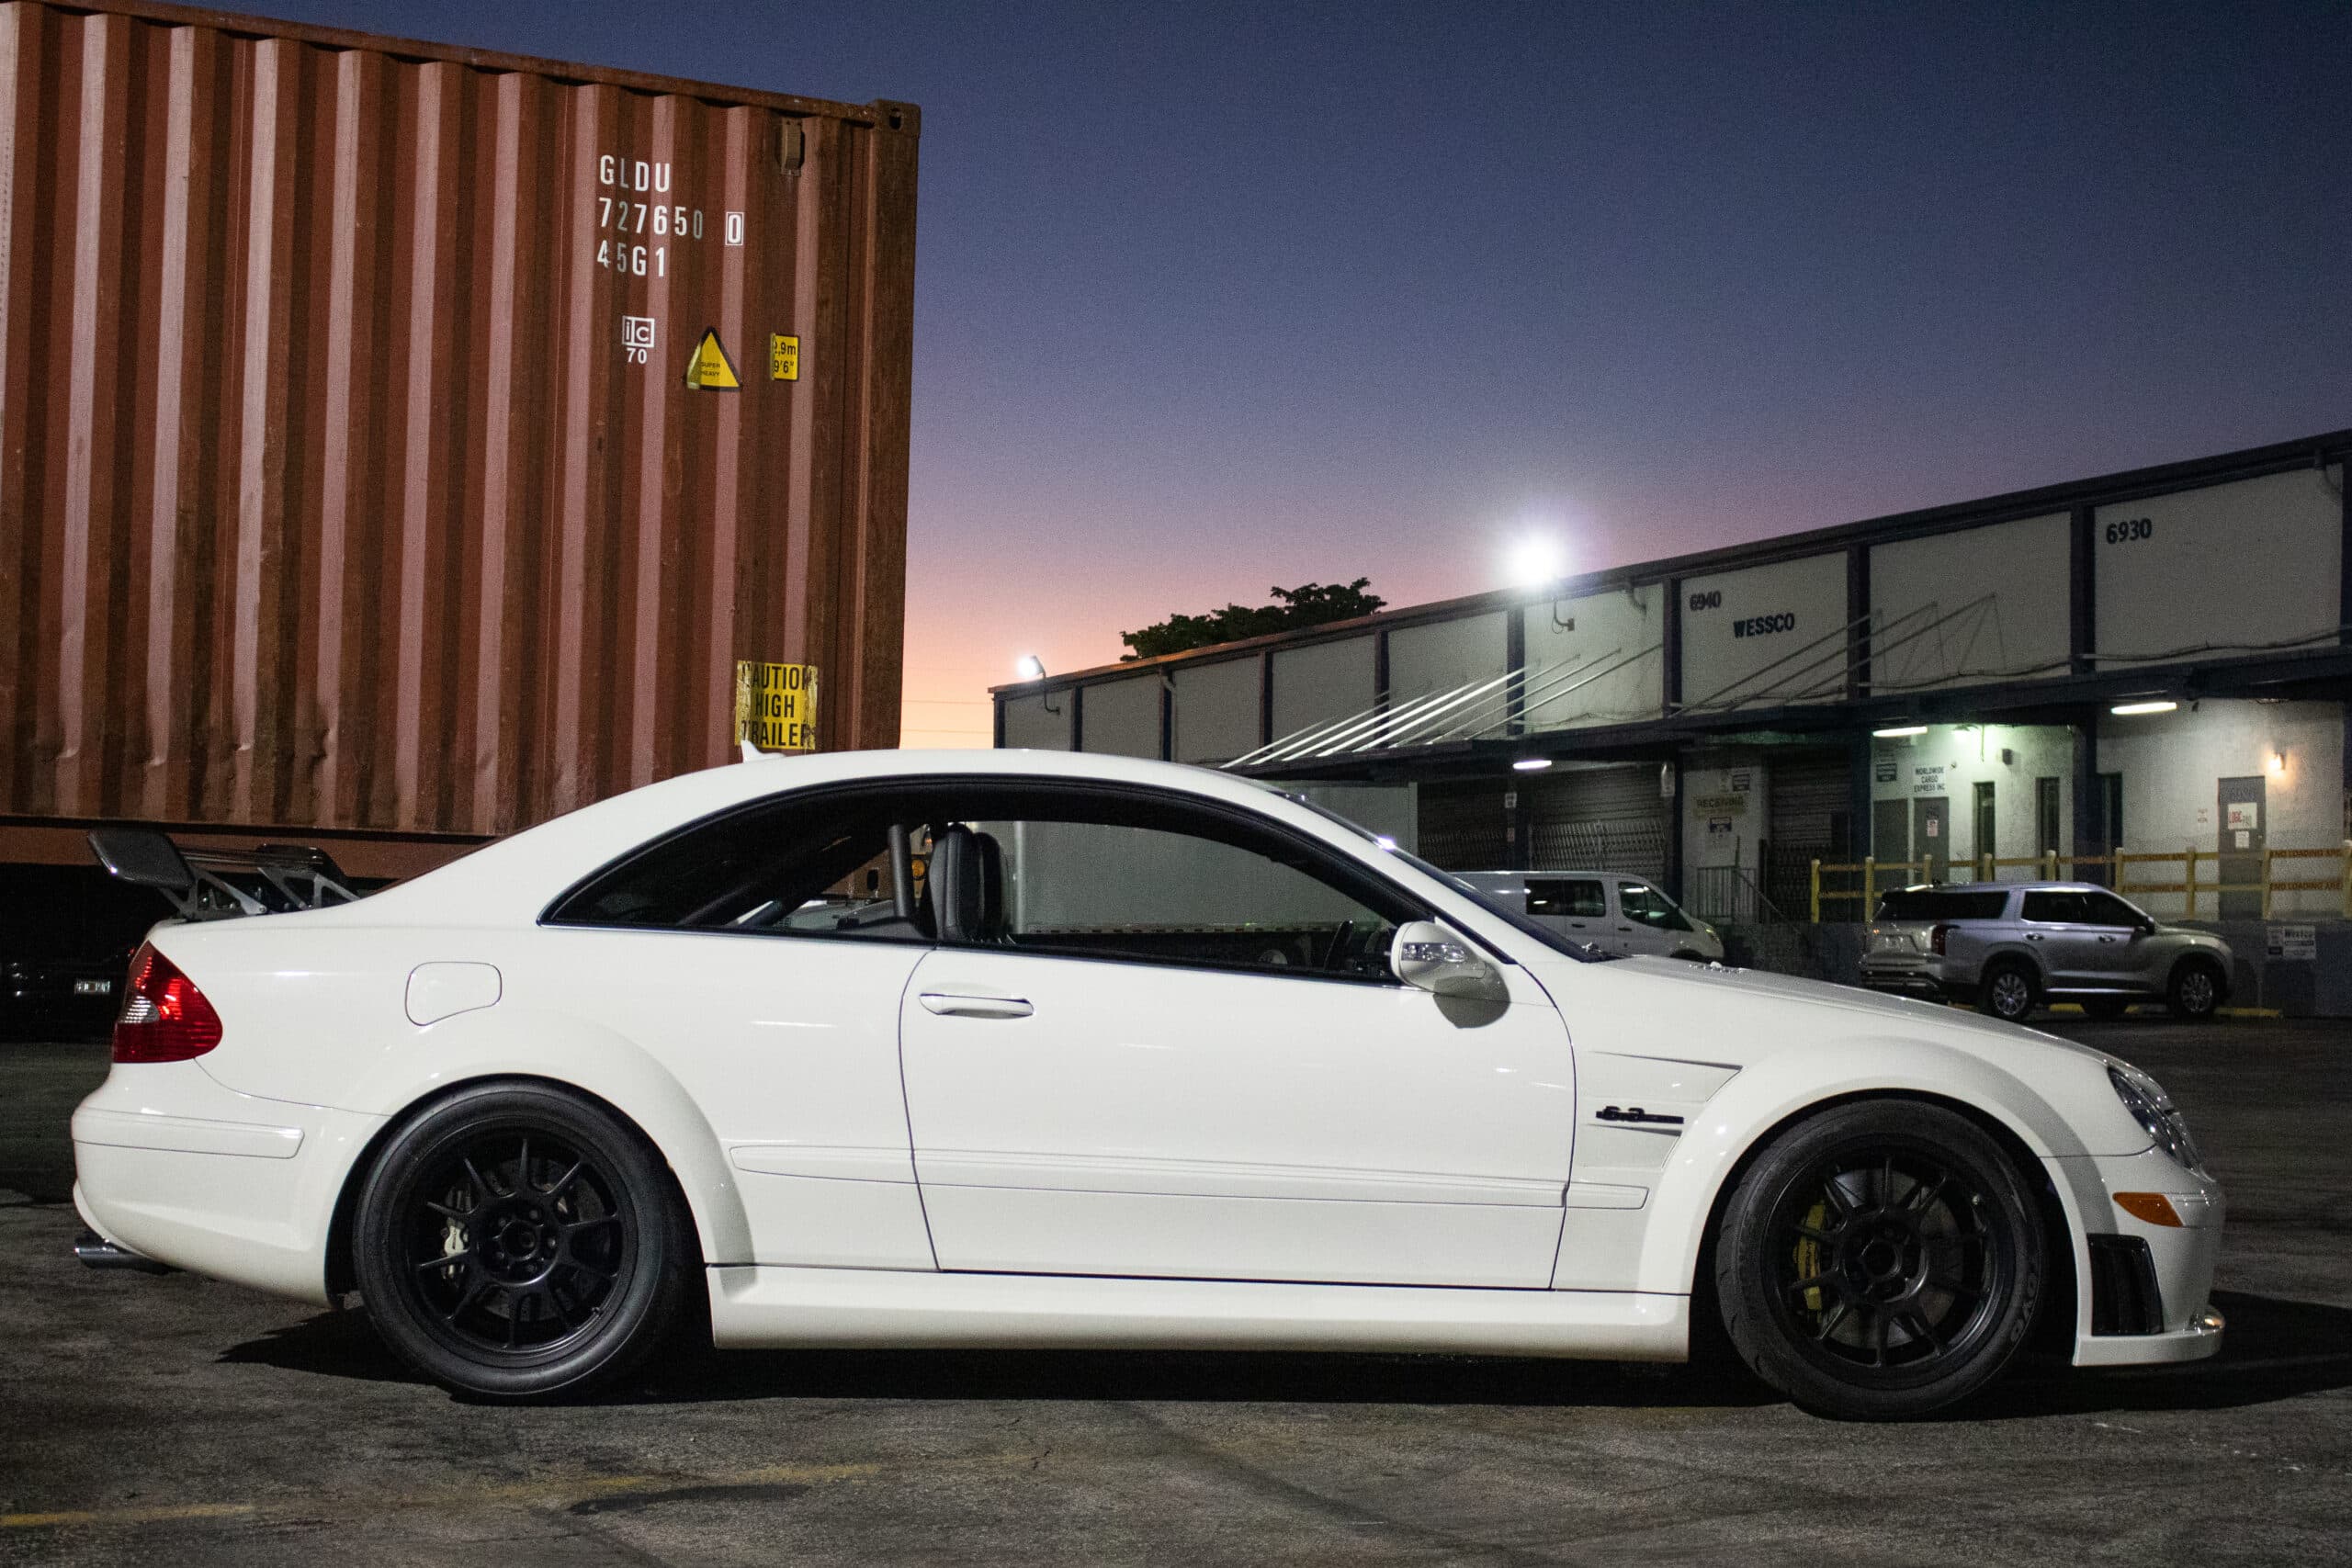 2008 Mercedes Benz CLK63 AMG Black Series by Weistec | 1 of 40 in Arctic White | 800 HP | Supercharged | Only 24K Miles | Fully Documented | Over $65K in Receipts